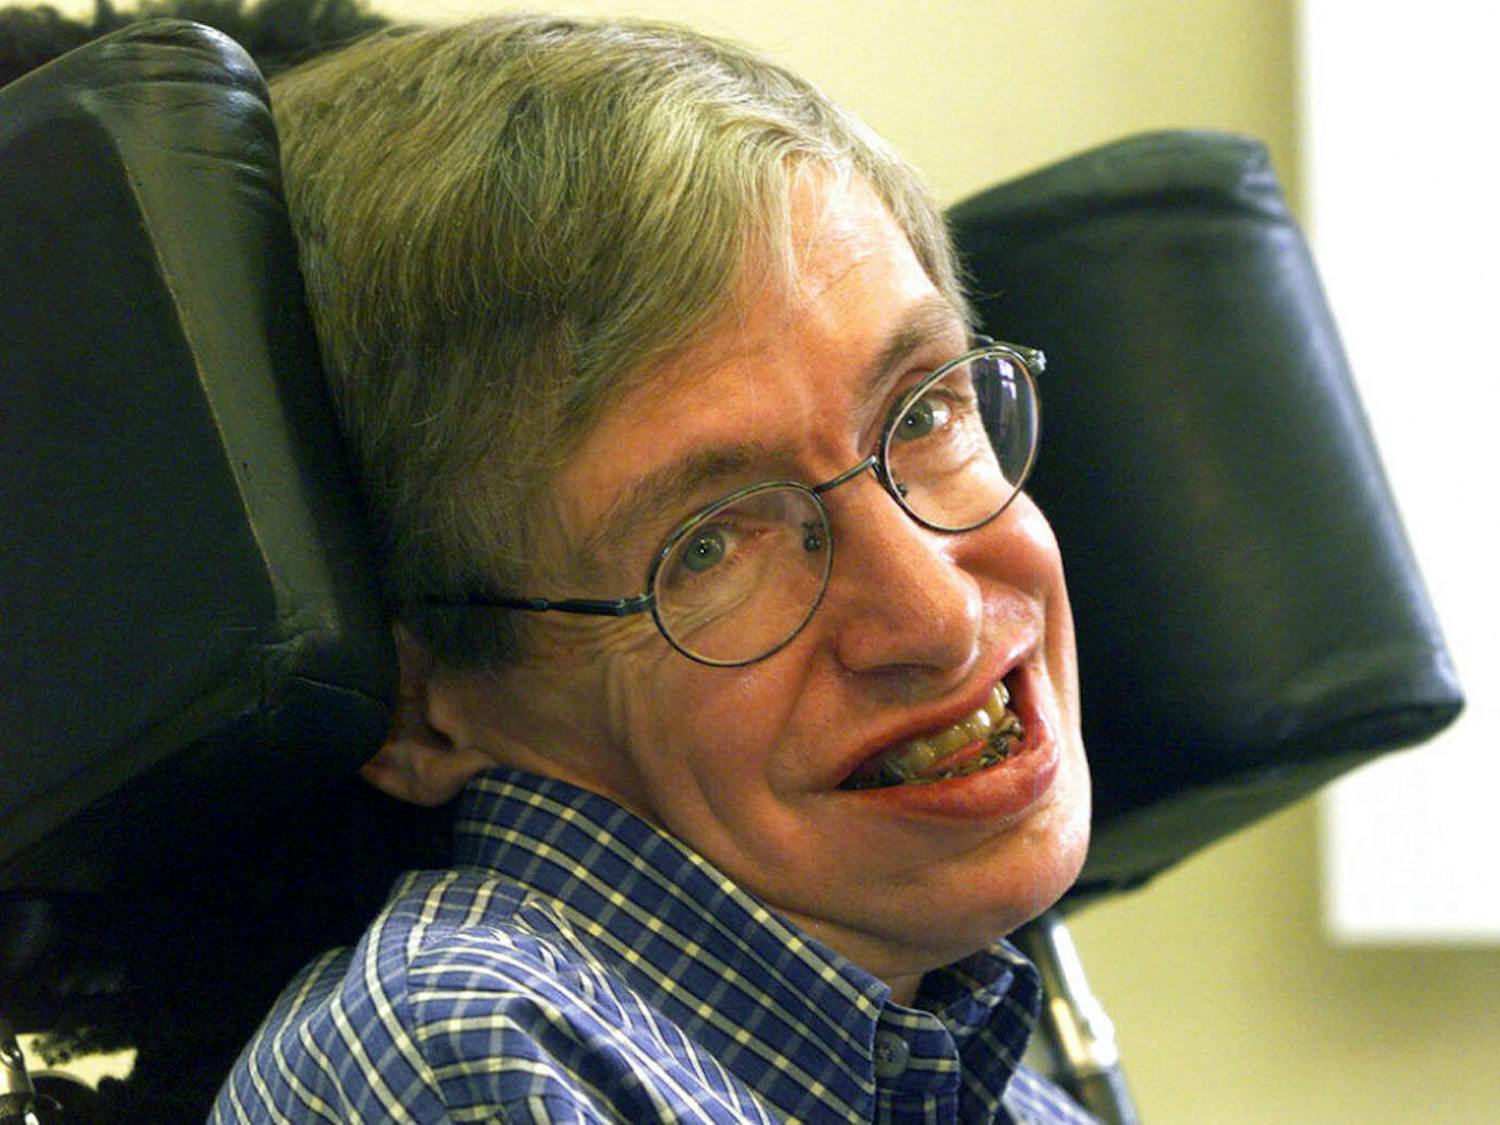 In this Wednesday, July 21, 1999 file photo Professor Stephen Hawking smiles during a news conference at the University of Potsdam, near Berlin, Germany. Hawking, whose brilliant mind ranged across time and space though his body was paralyzed by disease, has died, a family spokesman said early Wednesday, March 14, 2018.